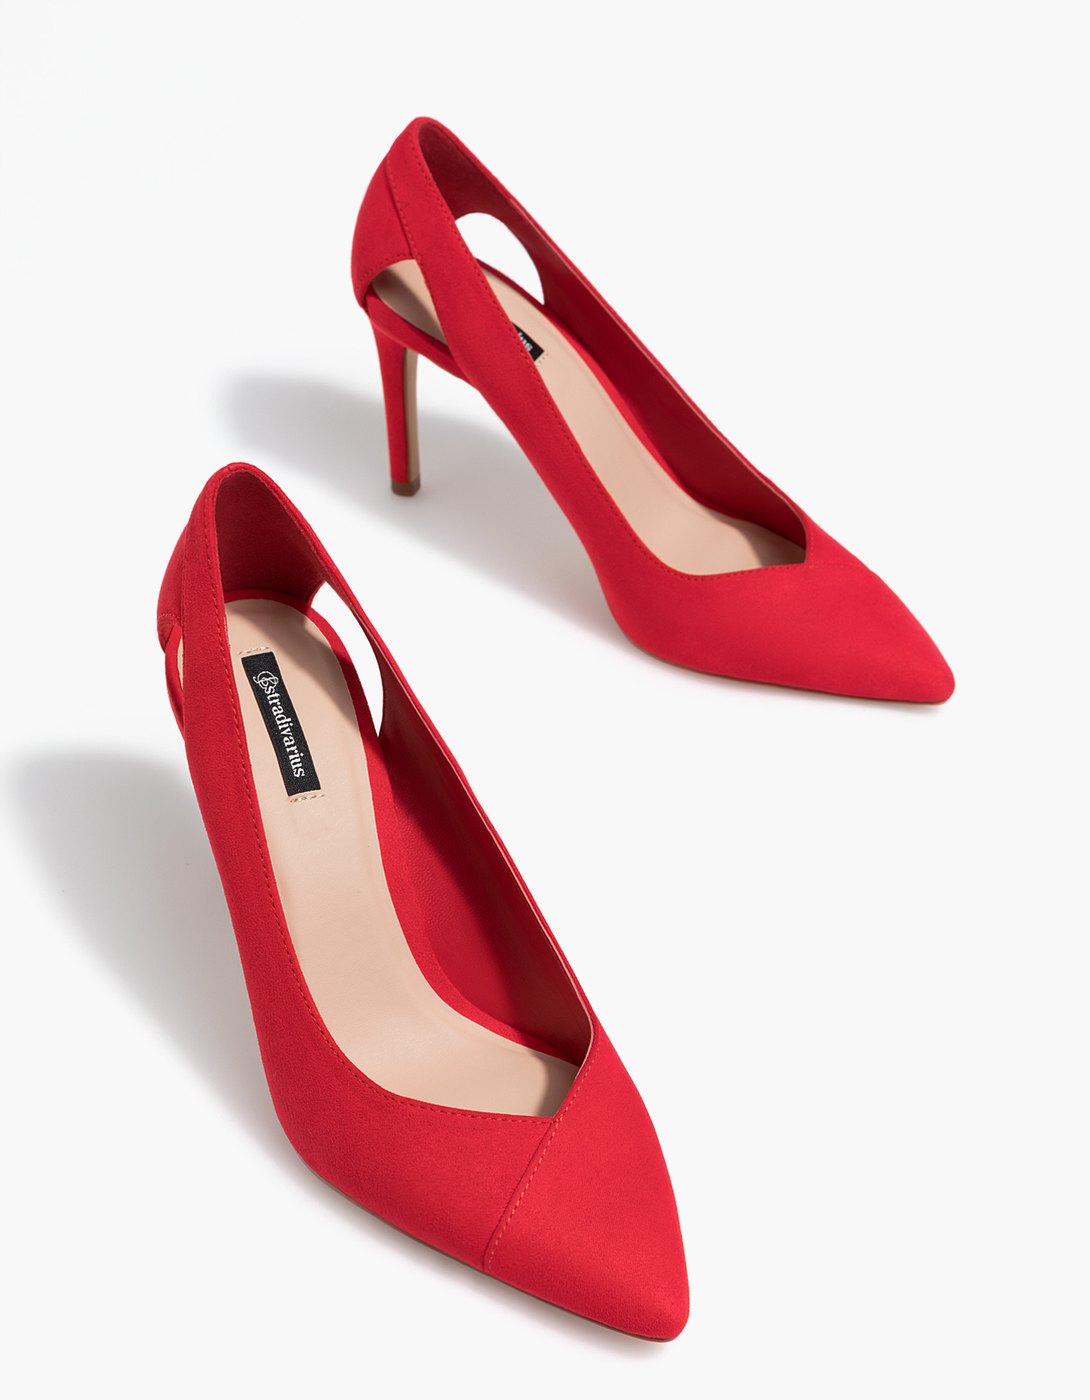 Stradivarius Red Cut Out High Heel Court Shoes